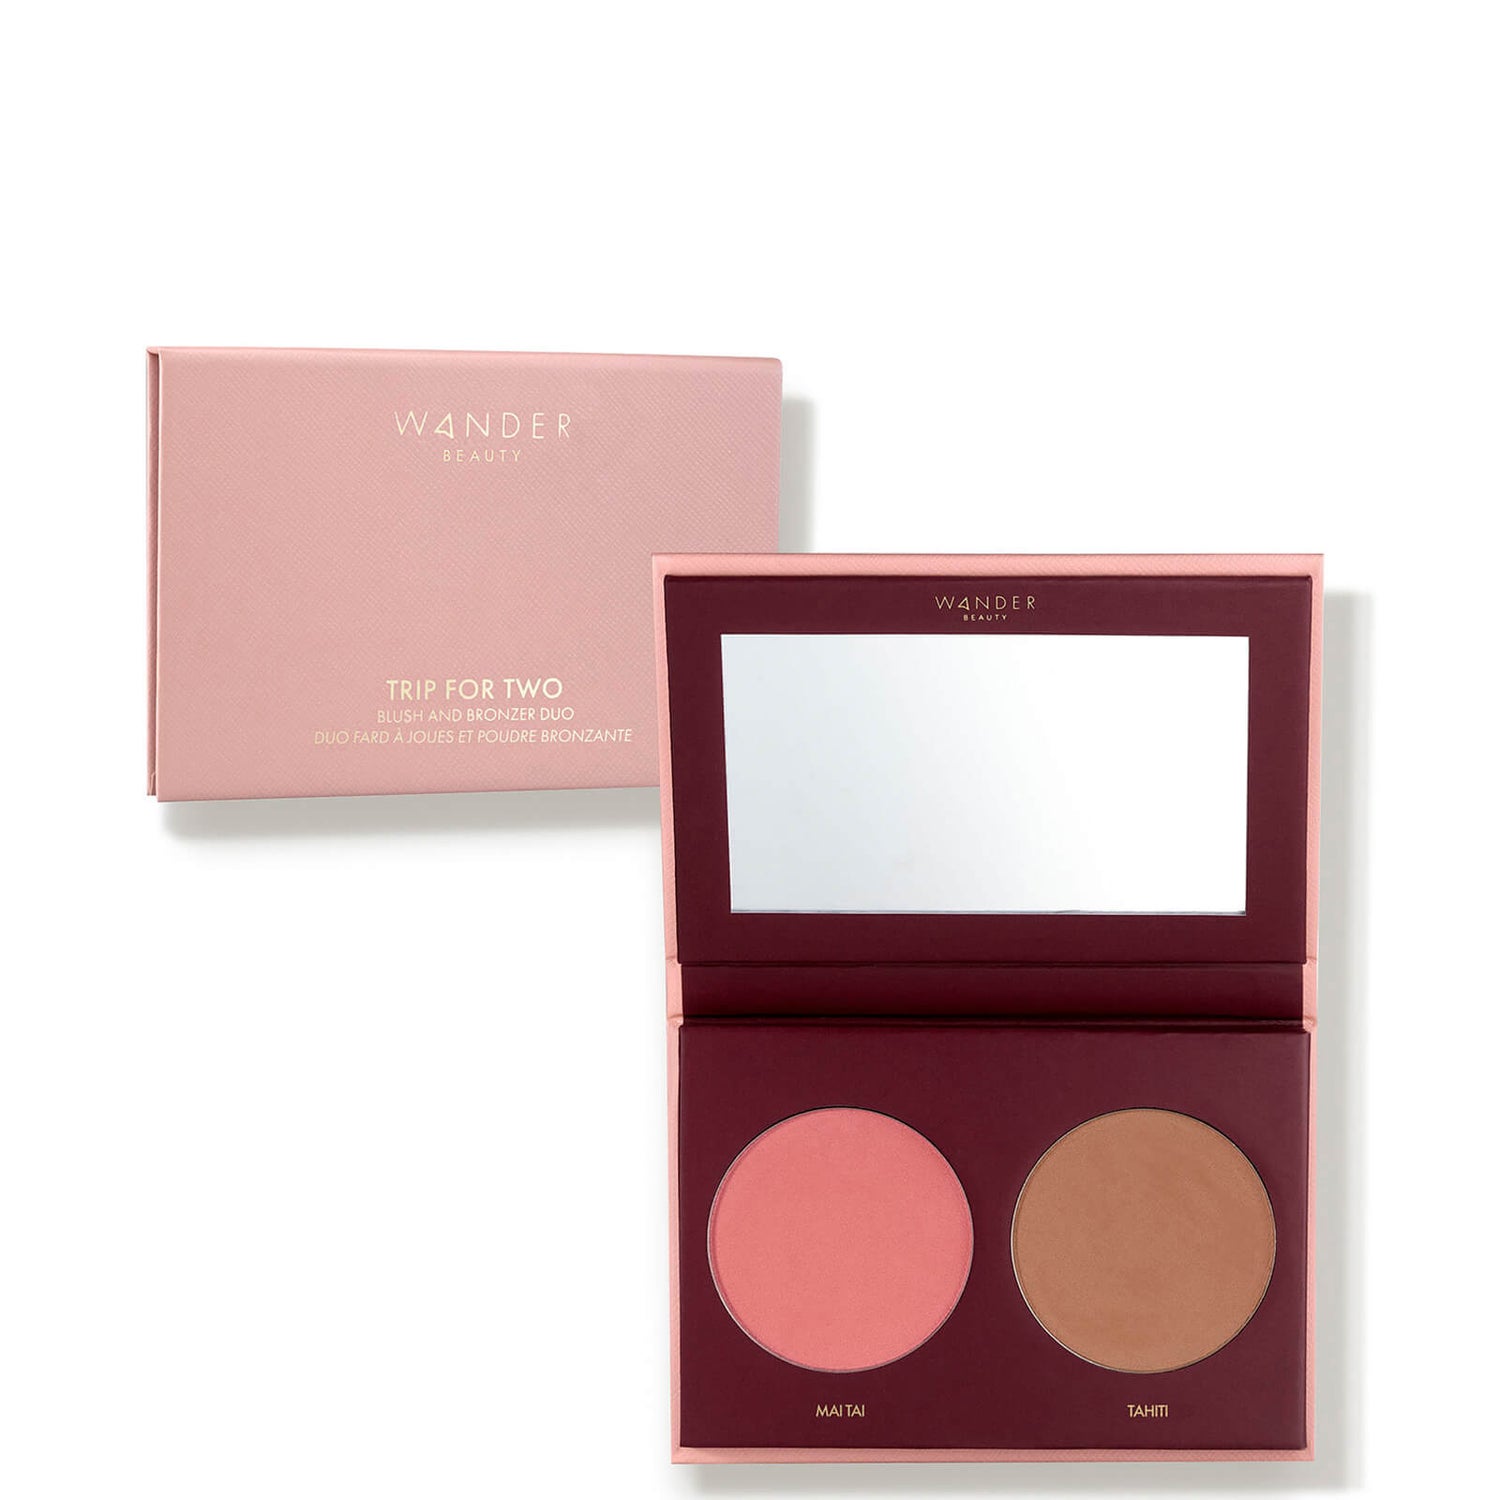 Wander Beauty Trip for Two Blush and Bronzer Duo 1 piece